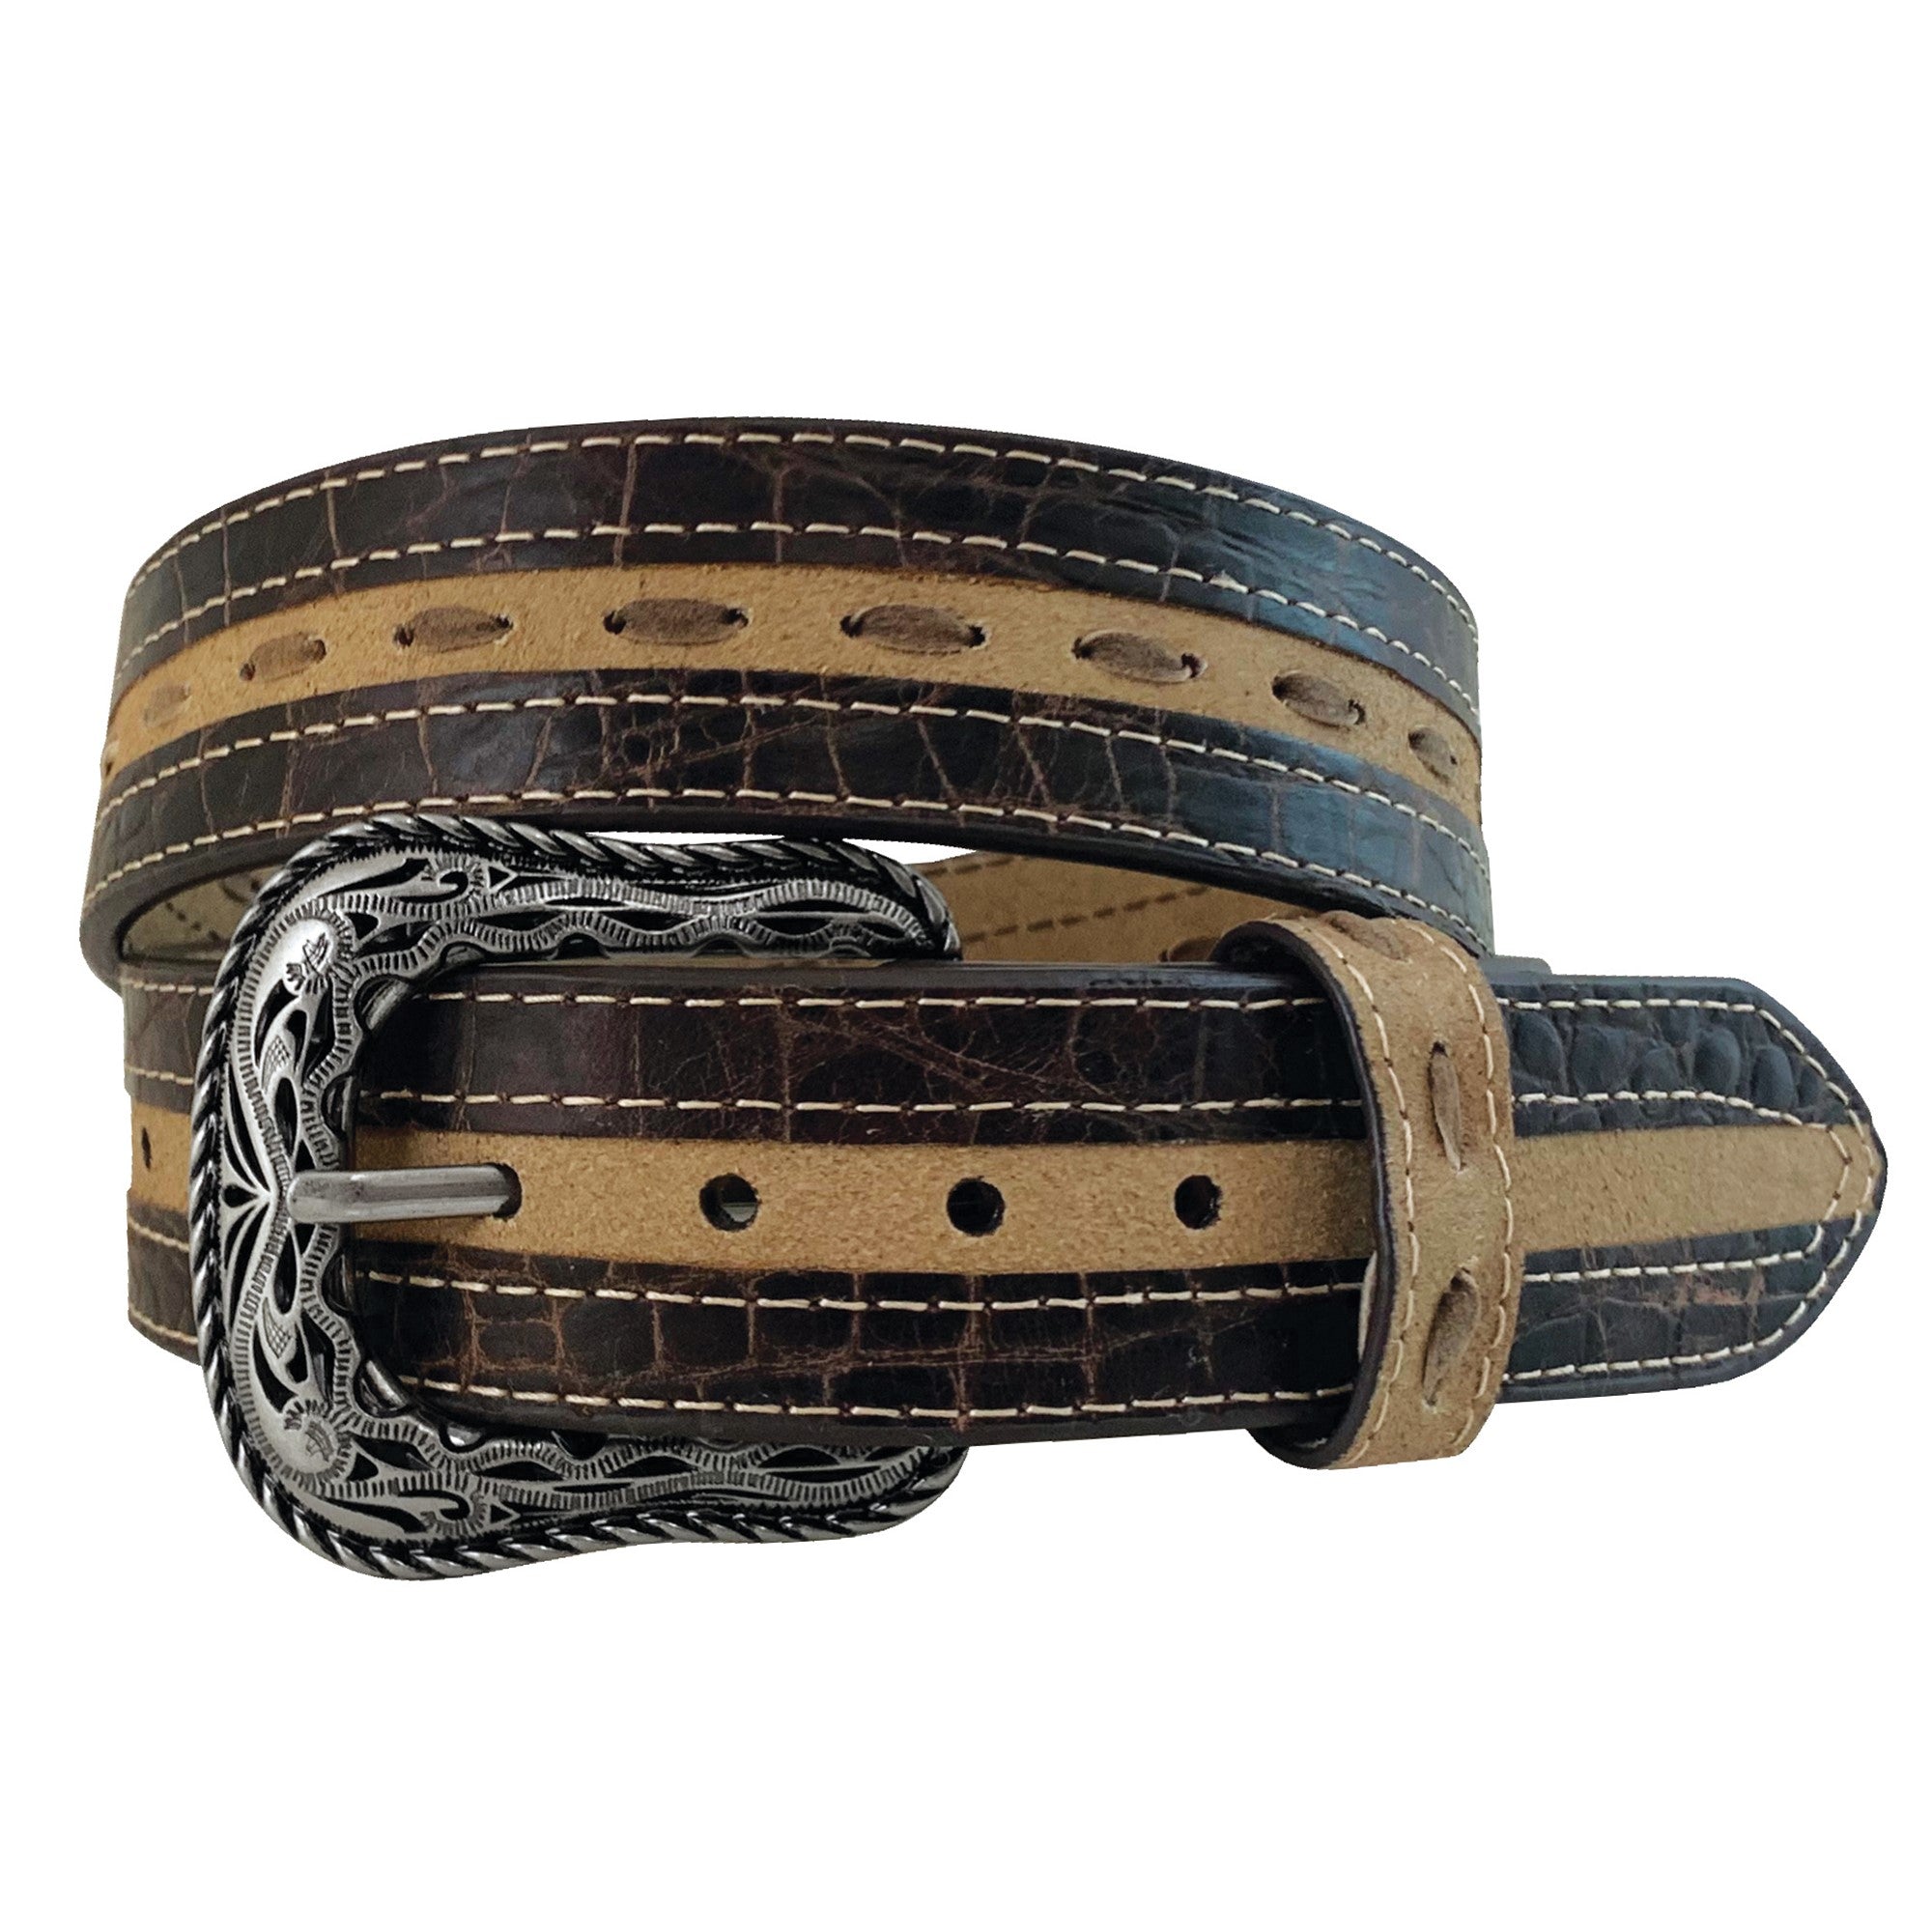 9564500 Roper Mens 1.5" Roughout Leather Belt Brown